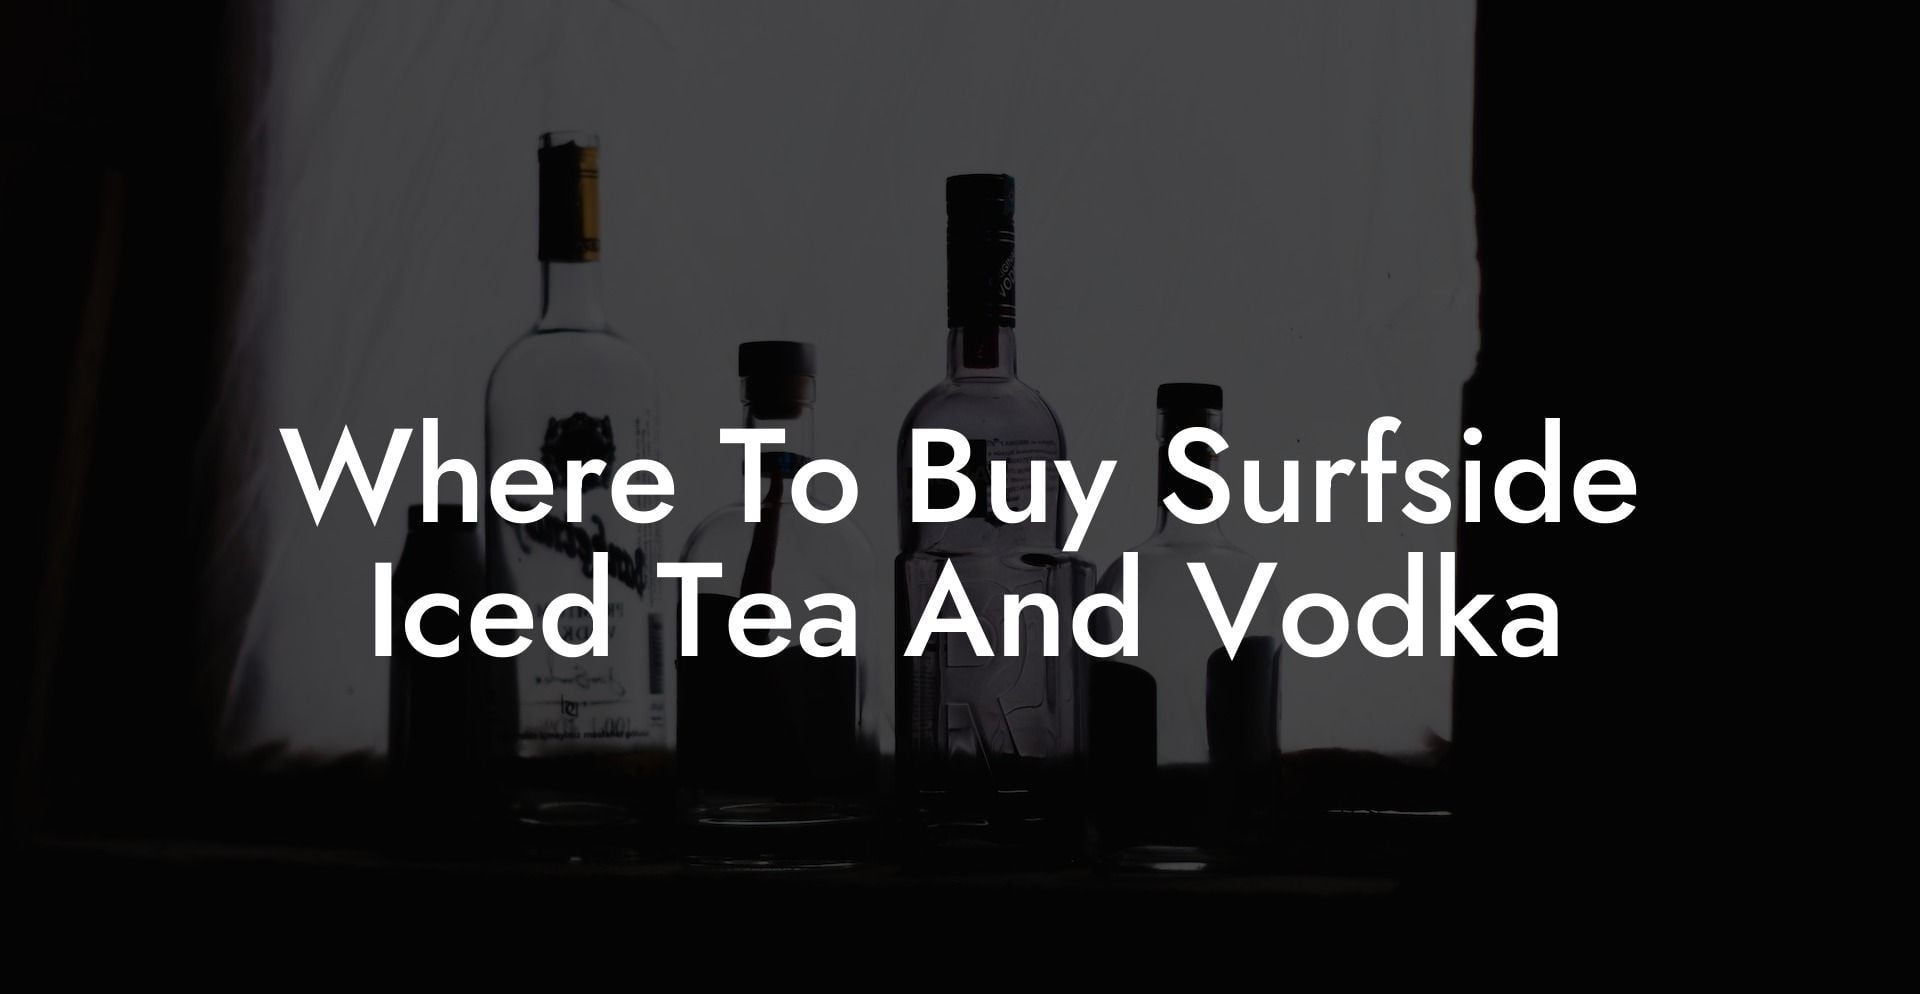 Where To Buy Surfside Iced Tea And Vodka